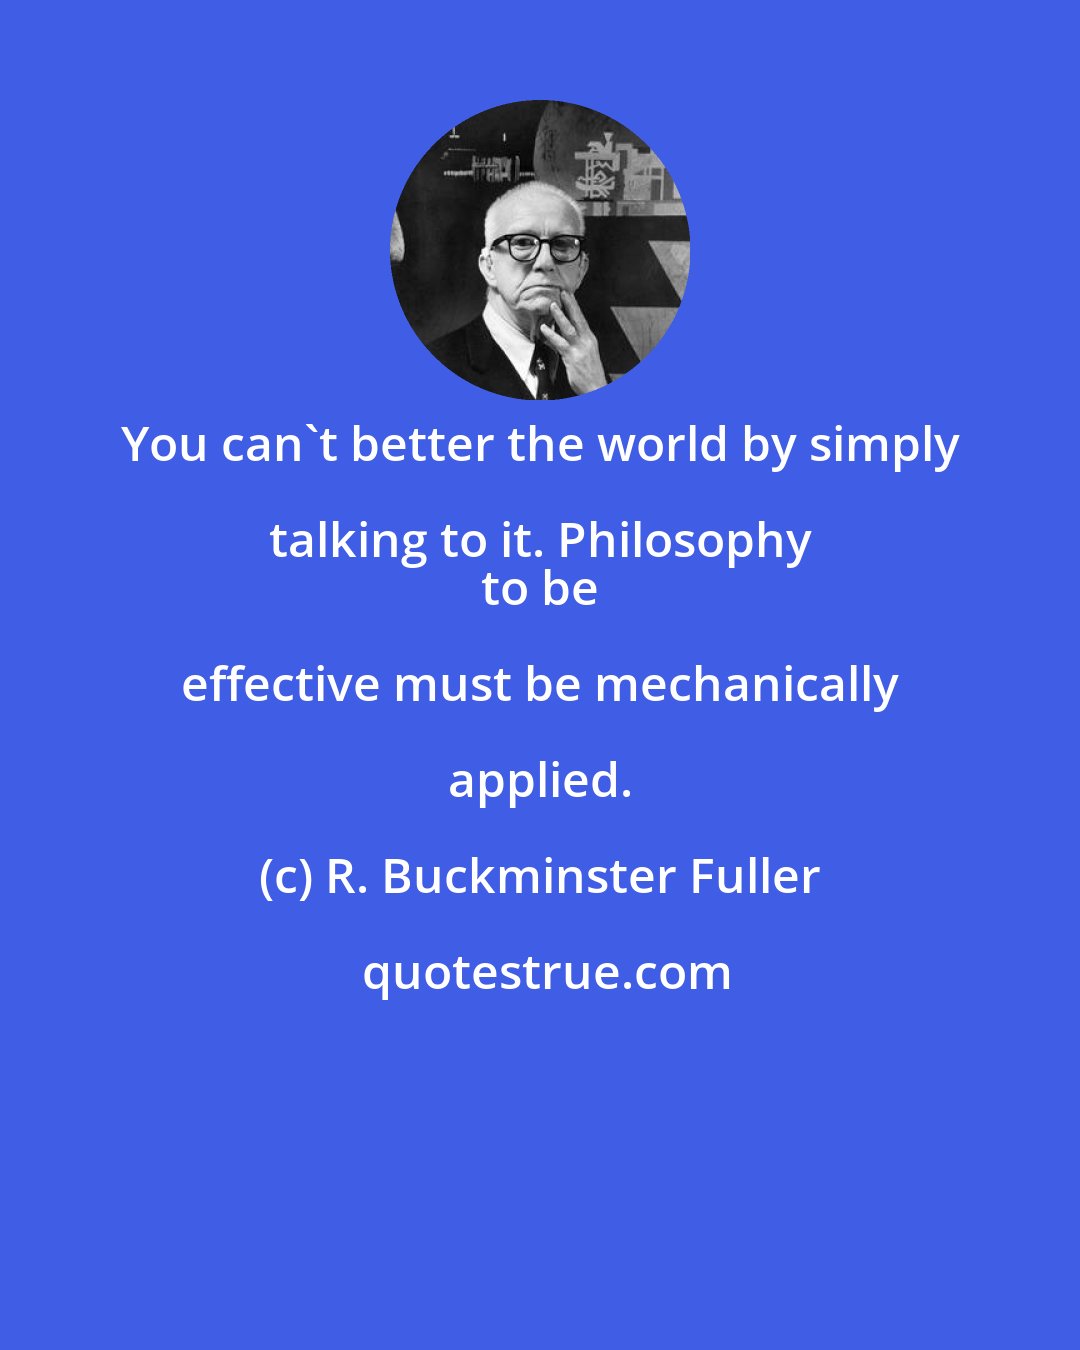 R. Buckminster Fuller: You can't better the world by simply talking to it. Philosophy 
 to be effective must be mechanically applied.